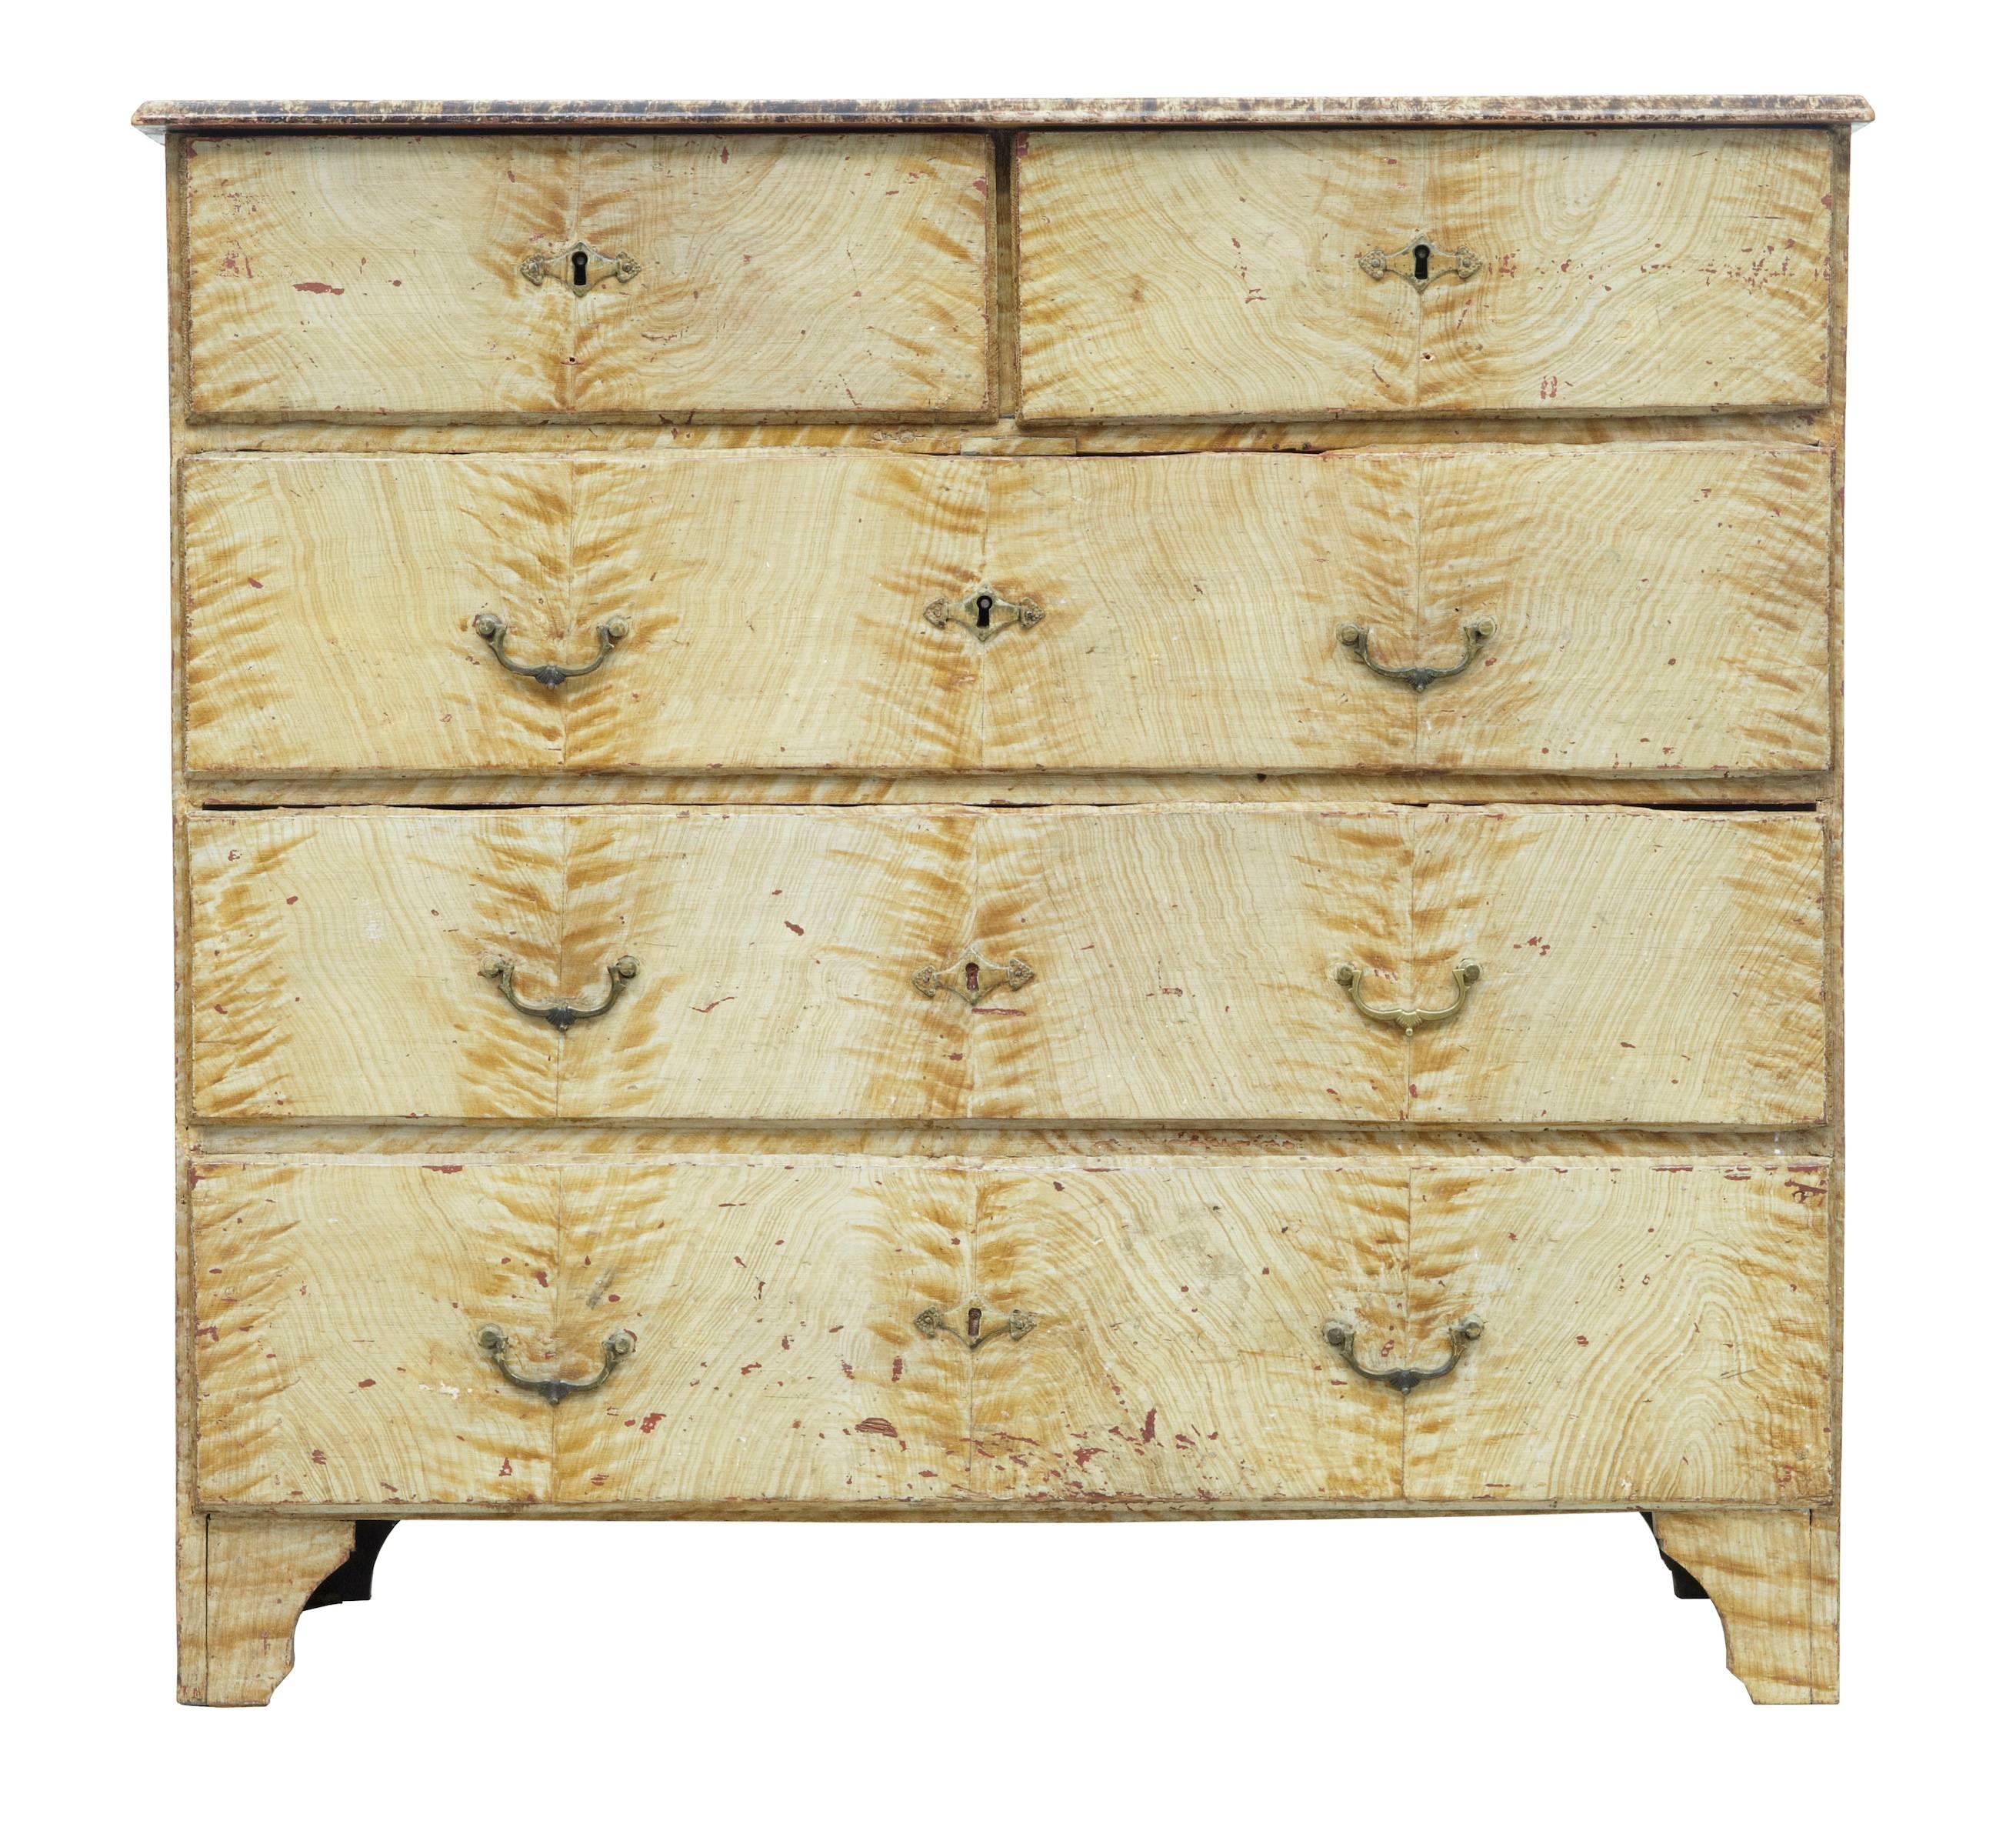 Good quality simulated grain painted Swedish chest, circa 1870.
Two short over three long drawers.
Two-tone painted border on the top.
Top two drawers open on the key, bottom three have handles.
Some losses to paint effect and drawer fronts,